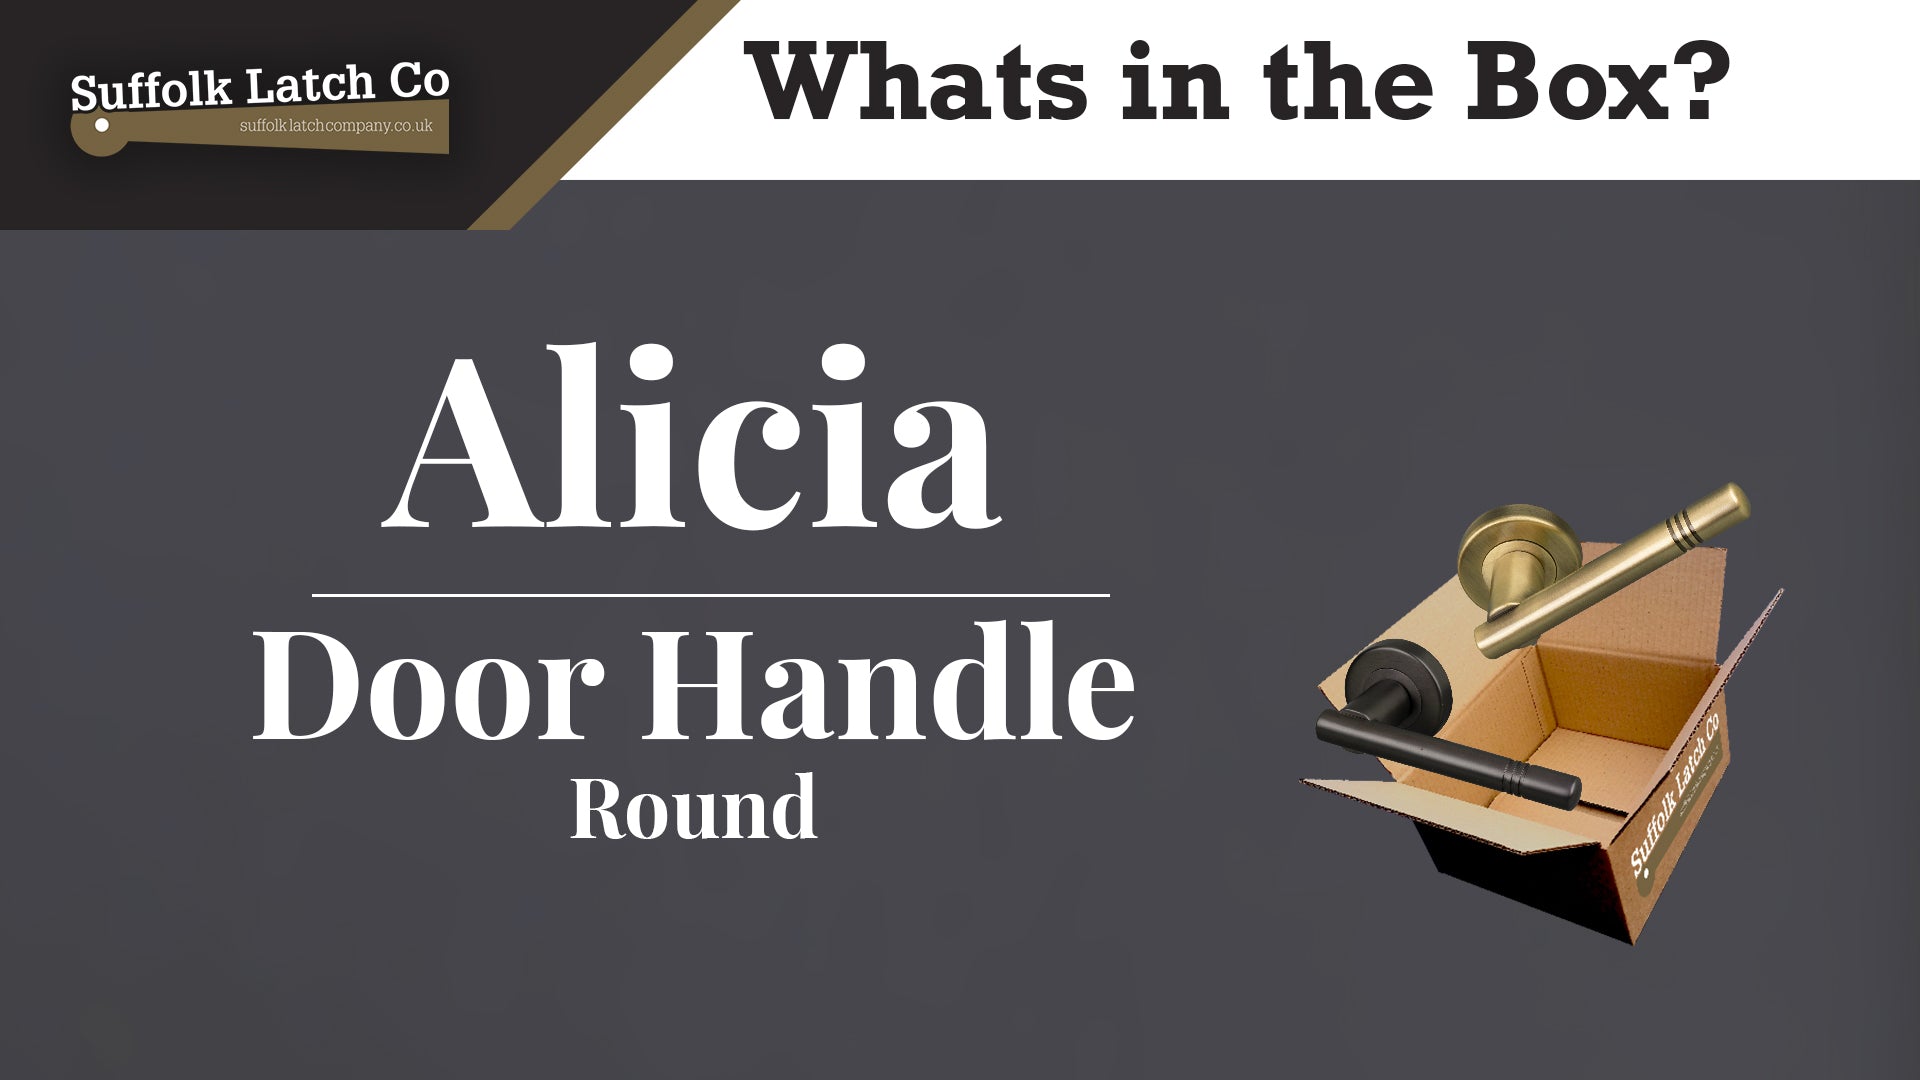 What's in the Box: Alicia Round Rose Door Handles